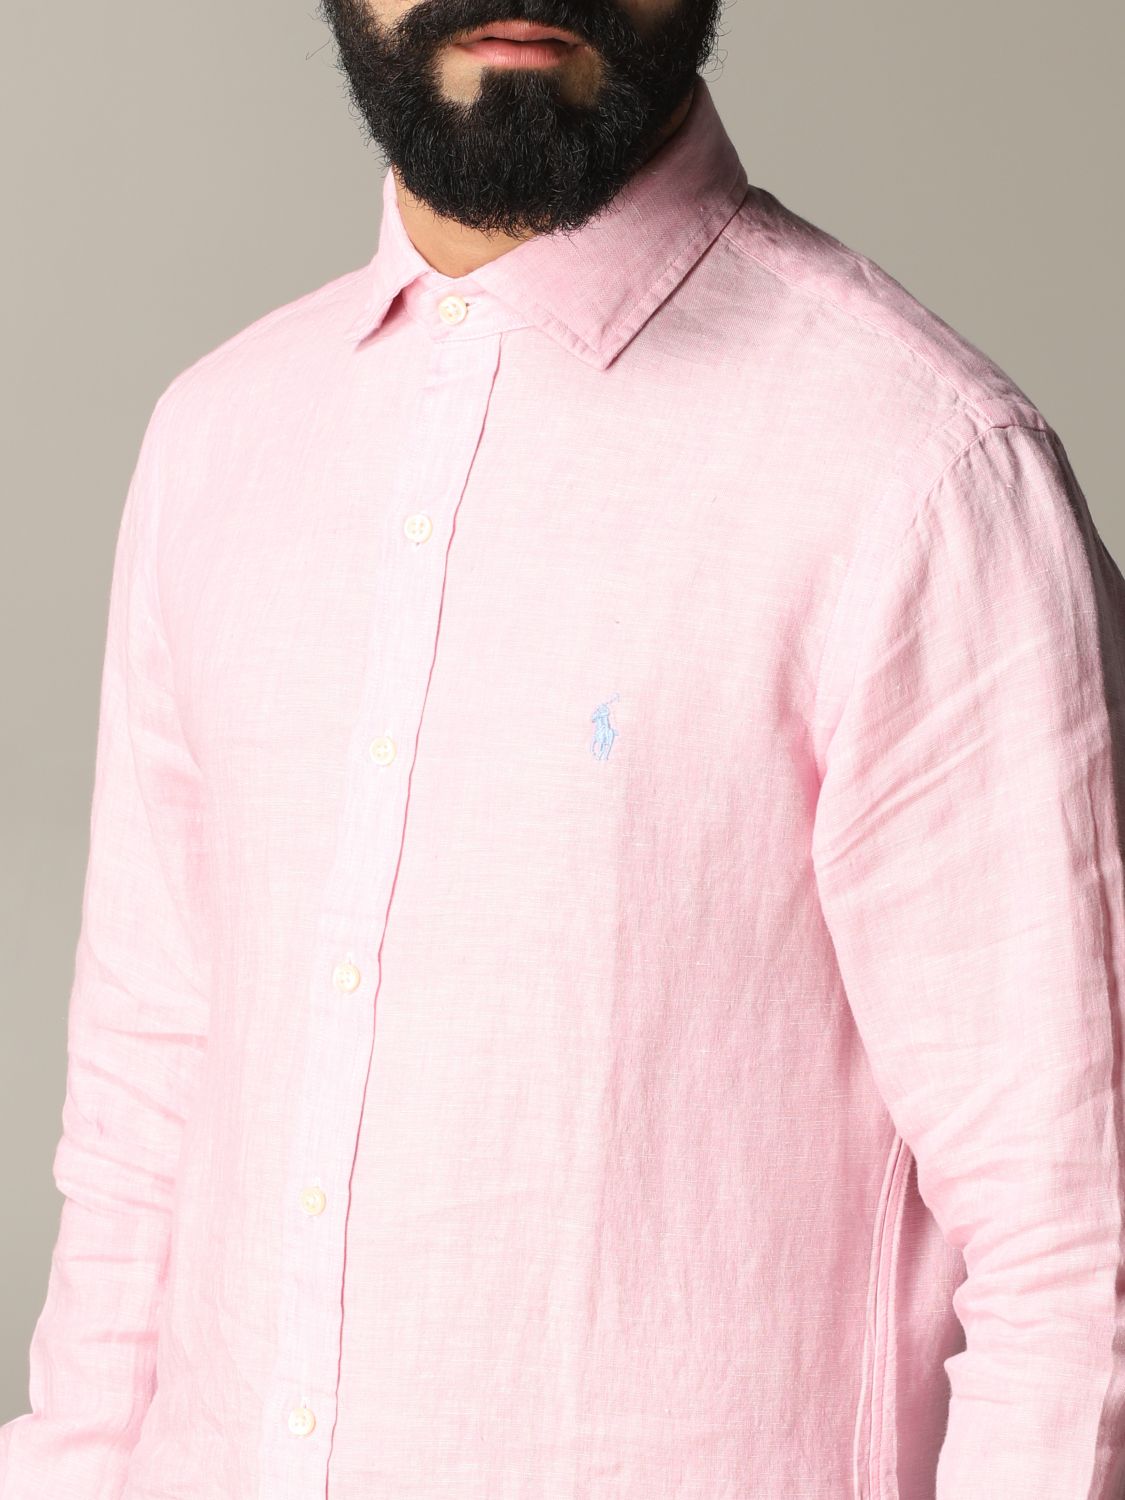 Shirt Polo Ralph Lauren: Polo Ralph Lauren shirt for man pink 5